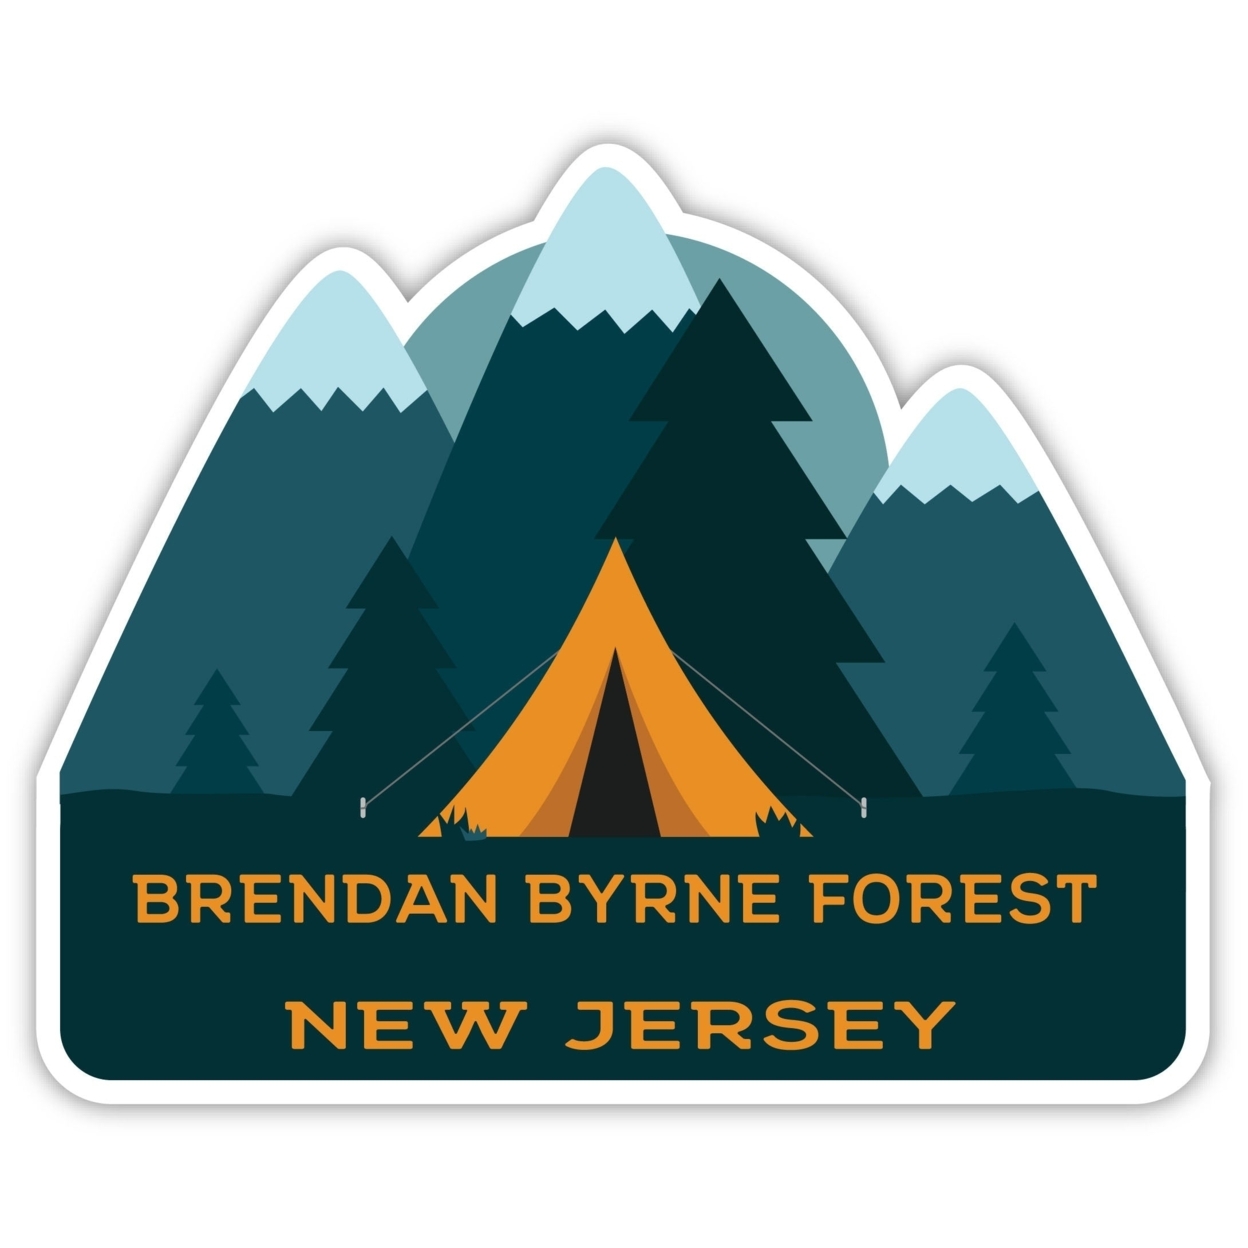 Brendan Byrne Forest New Jersey Souvenir Decorative Stickers (Choose Theme And Size) - Single Unit, 6-Inch, Tent